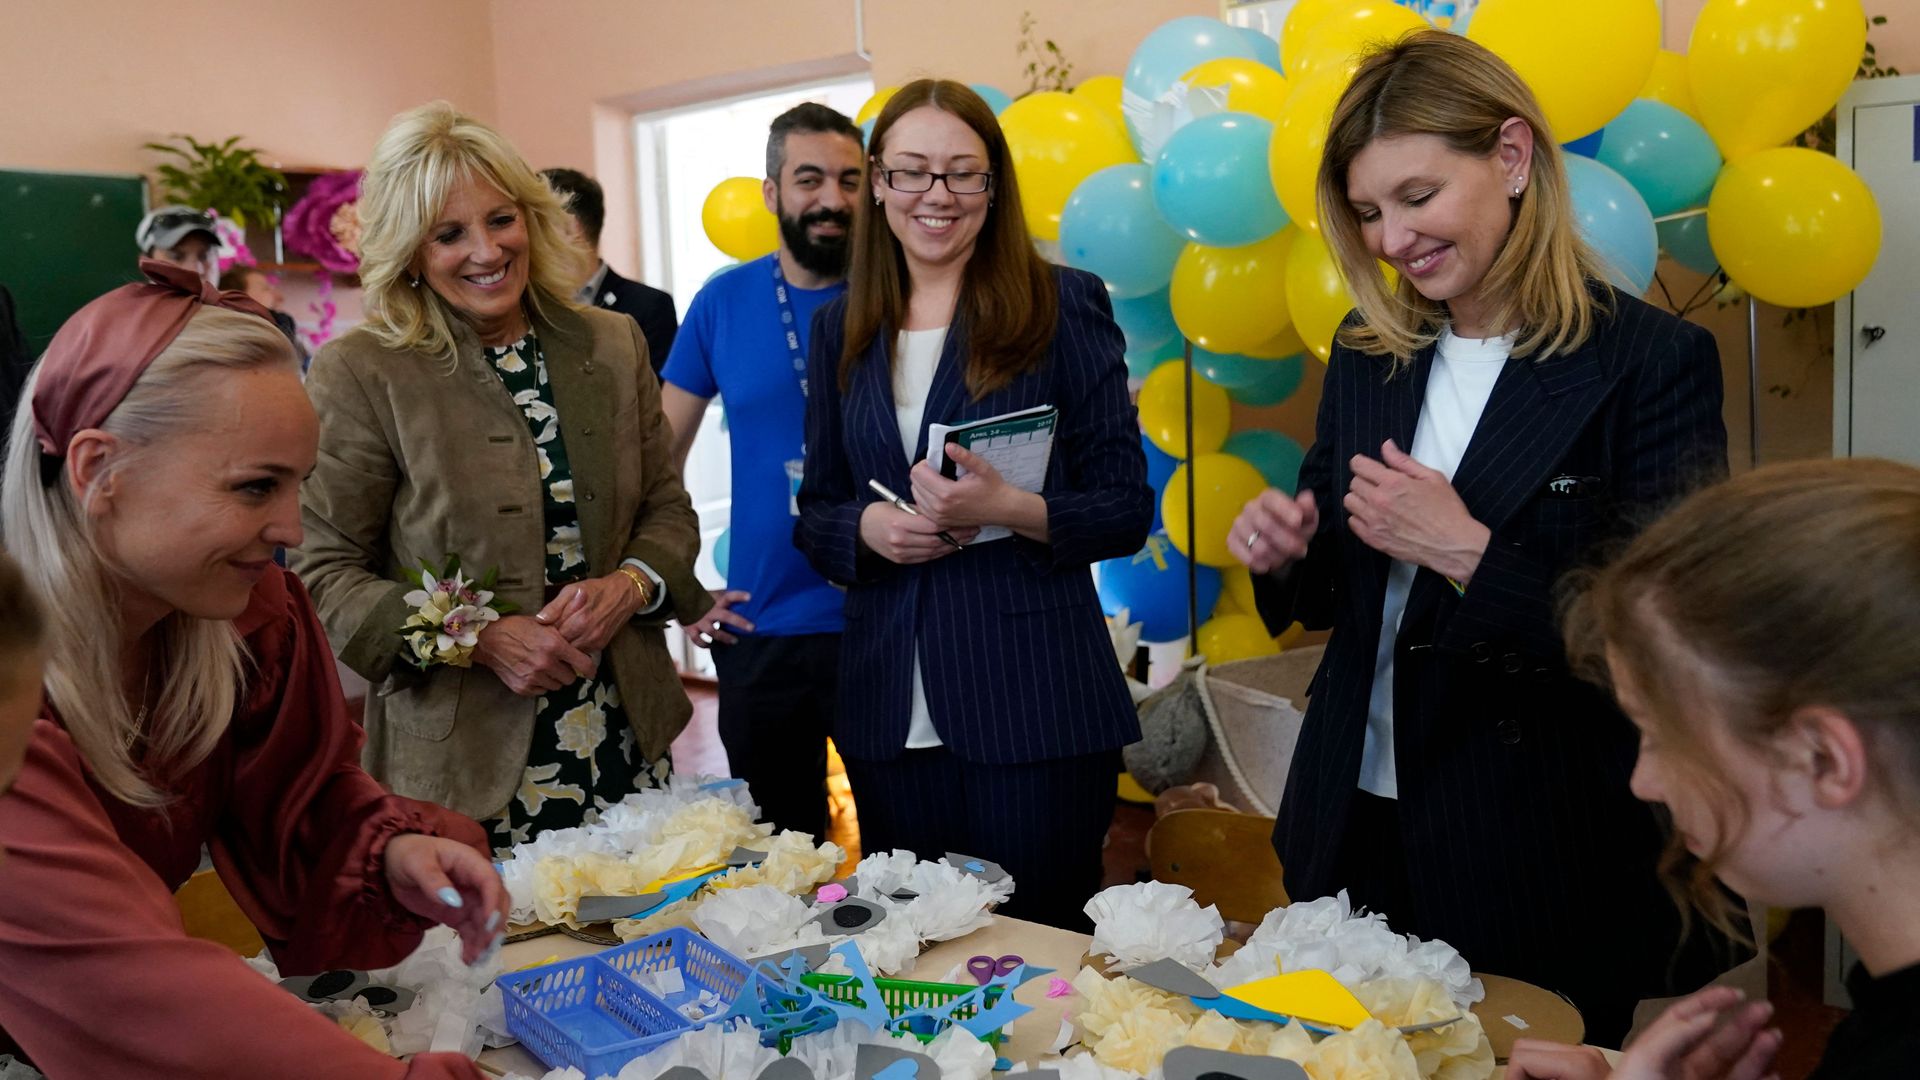 The first ladies of the U.S. and Ukraine are seen watching a girl assemble flowers.